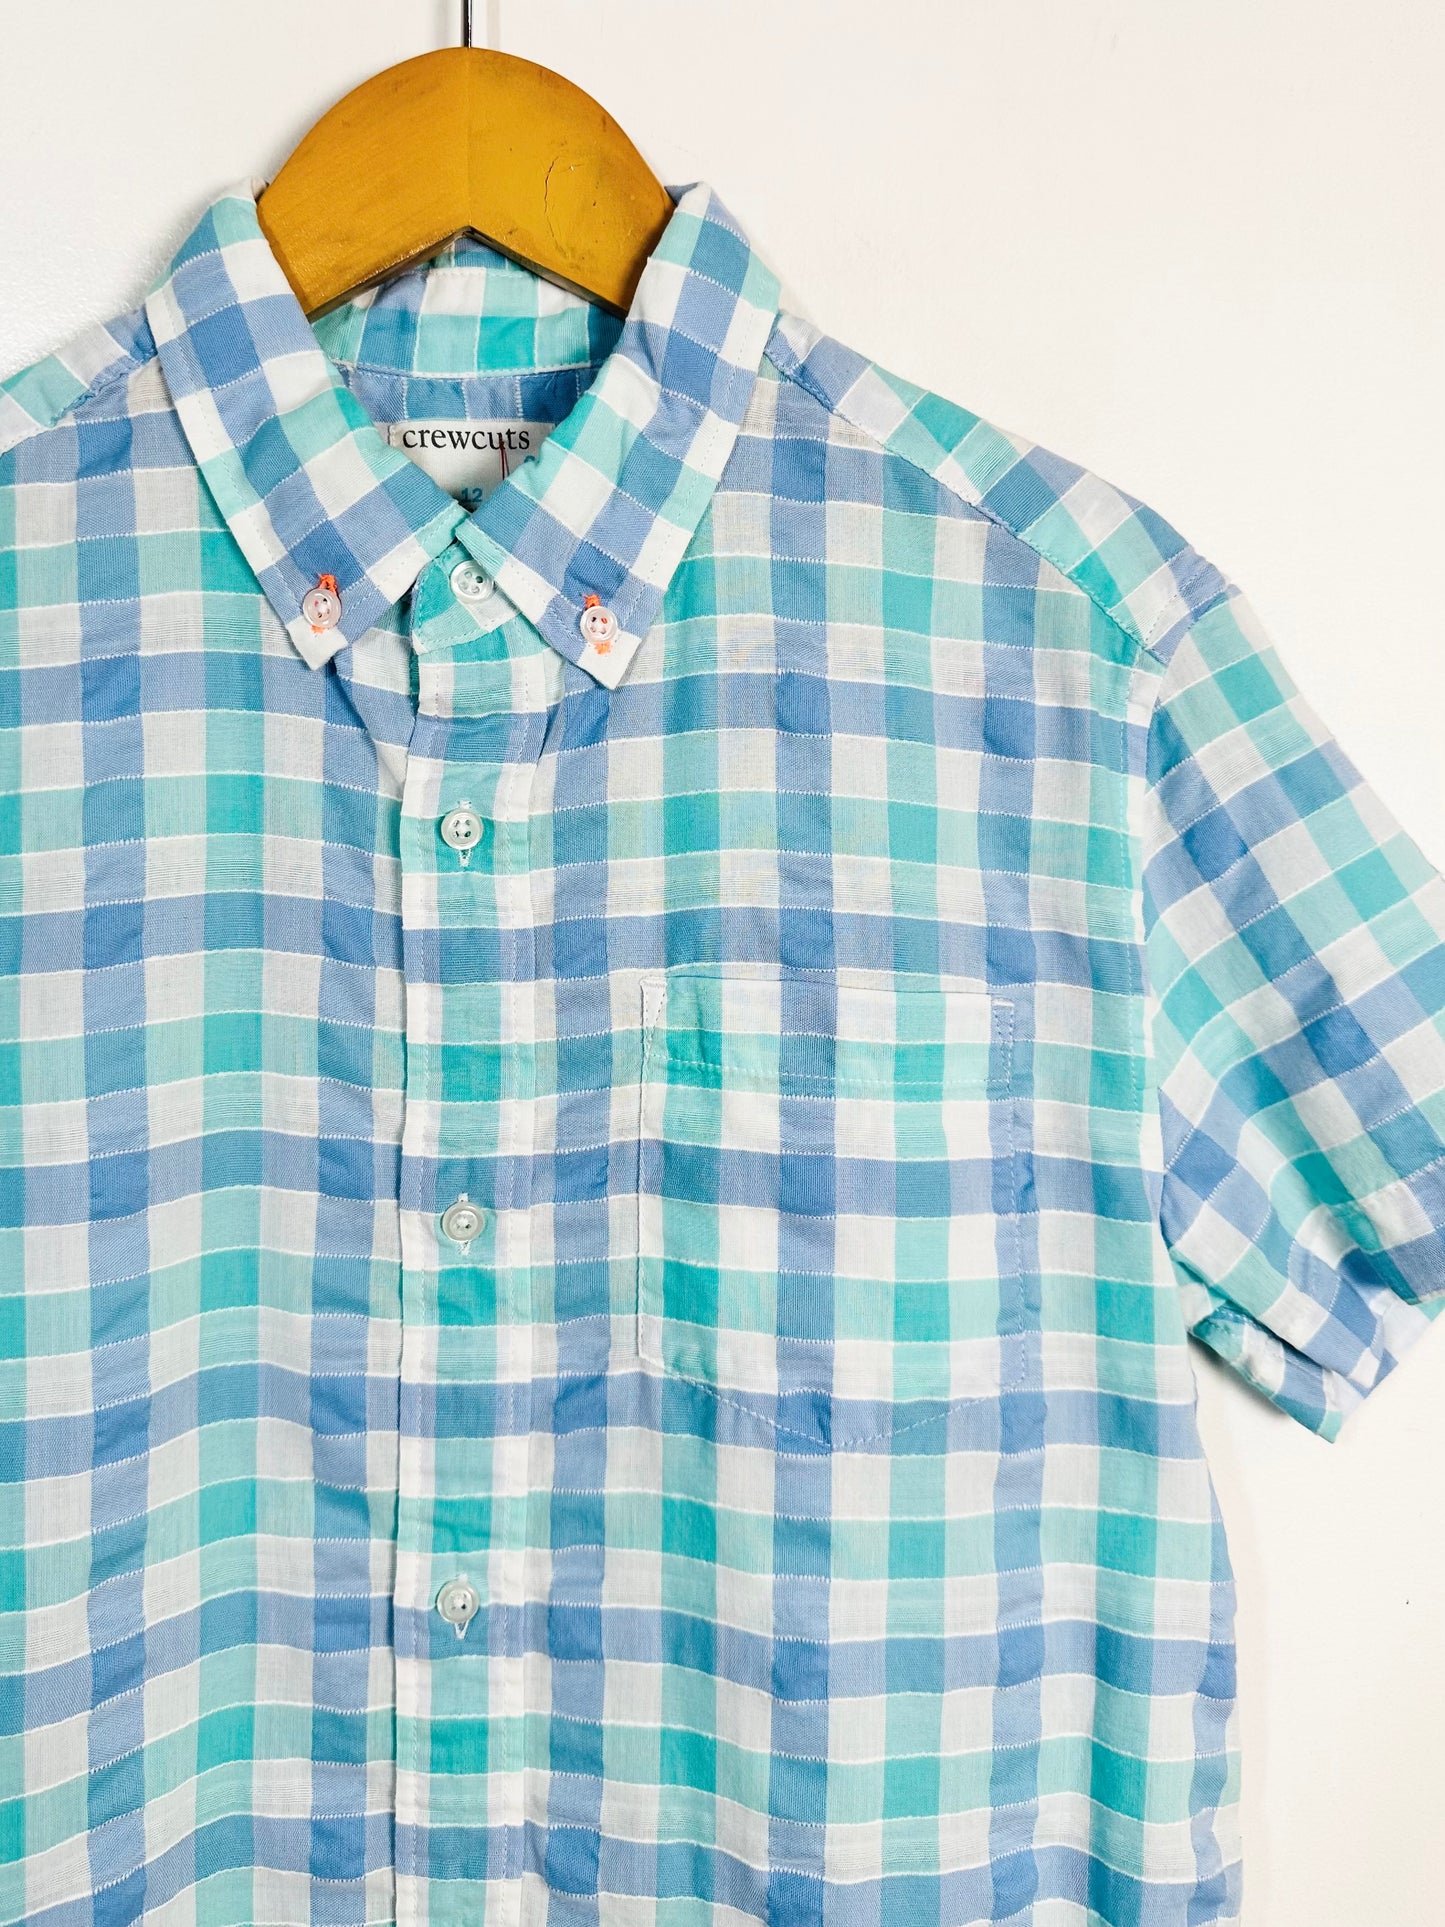 Crewcuts Plaid Button-Up / 12Y